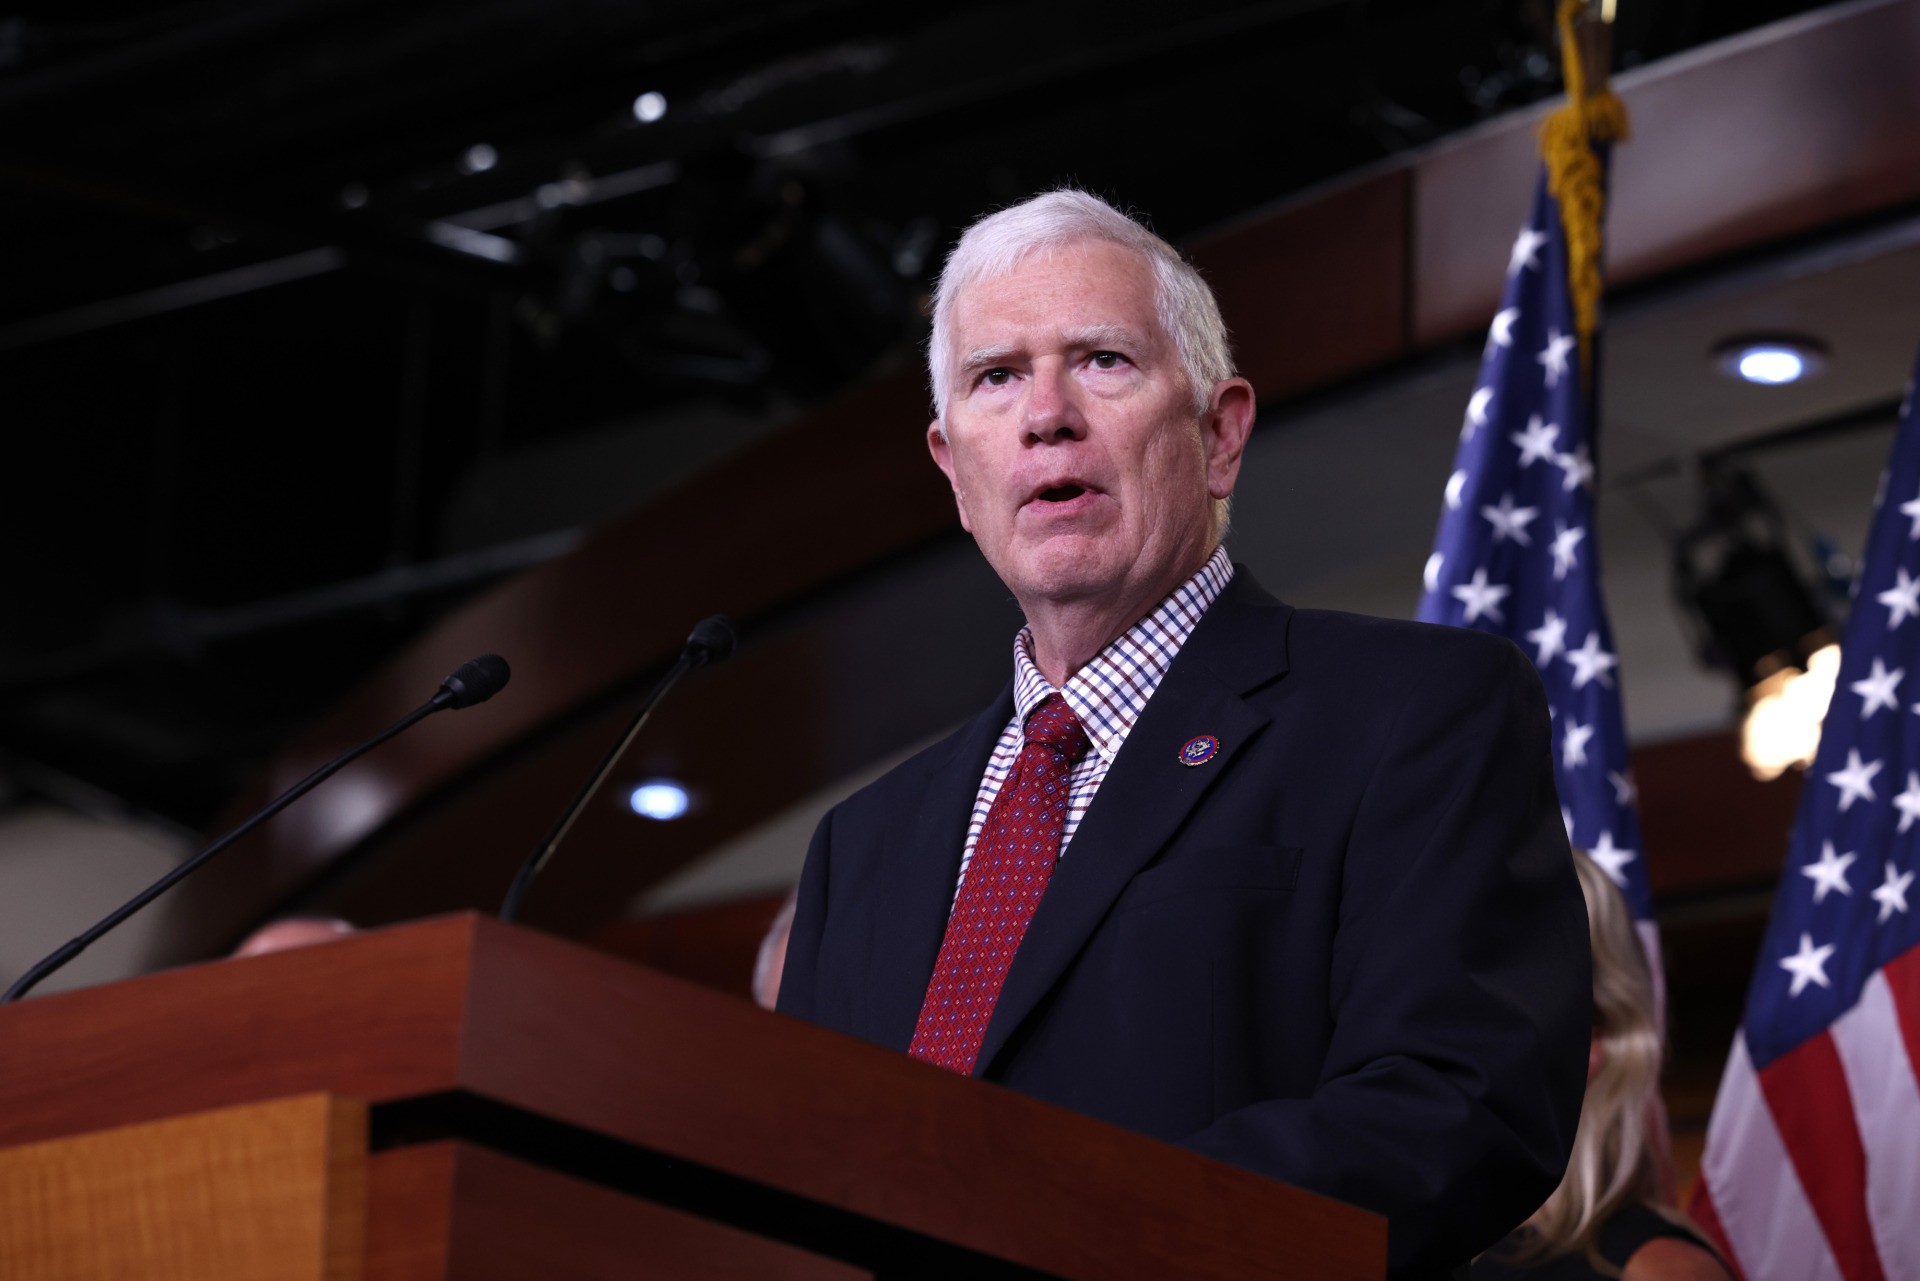 WASHINGTON, DC - JUNE 15: Rep. Mo Brooks (R-GA) speaks at a news conference on the “Fire Fauci Act” on Capitol Hill on June 15, 2021 in Washington, DC. The bill, drafted by Rep. Marjorie Taylor Greene (R-GA) , states that Dr. Anthony Fauci be removed from his position for allegedly deceiving the American people. (Photo by Anna Moneymaker/Getty Images)